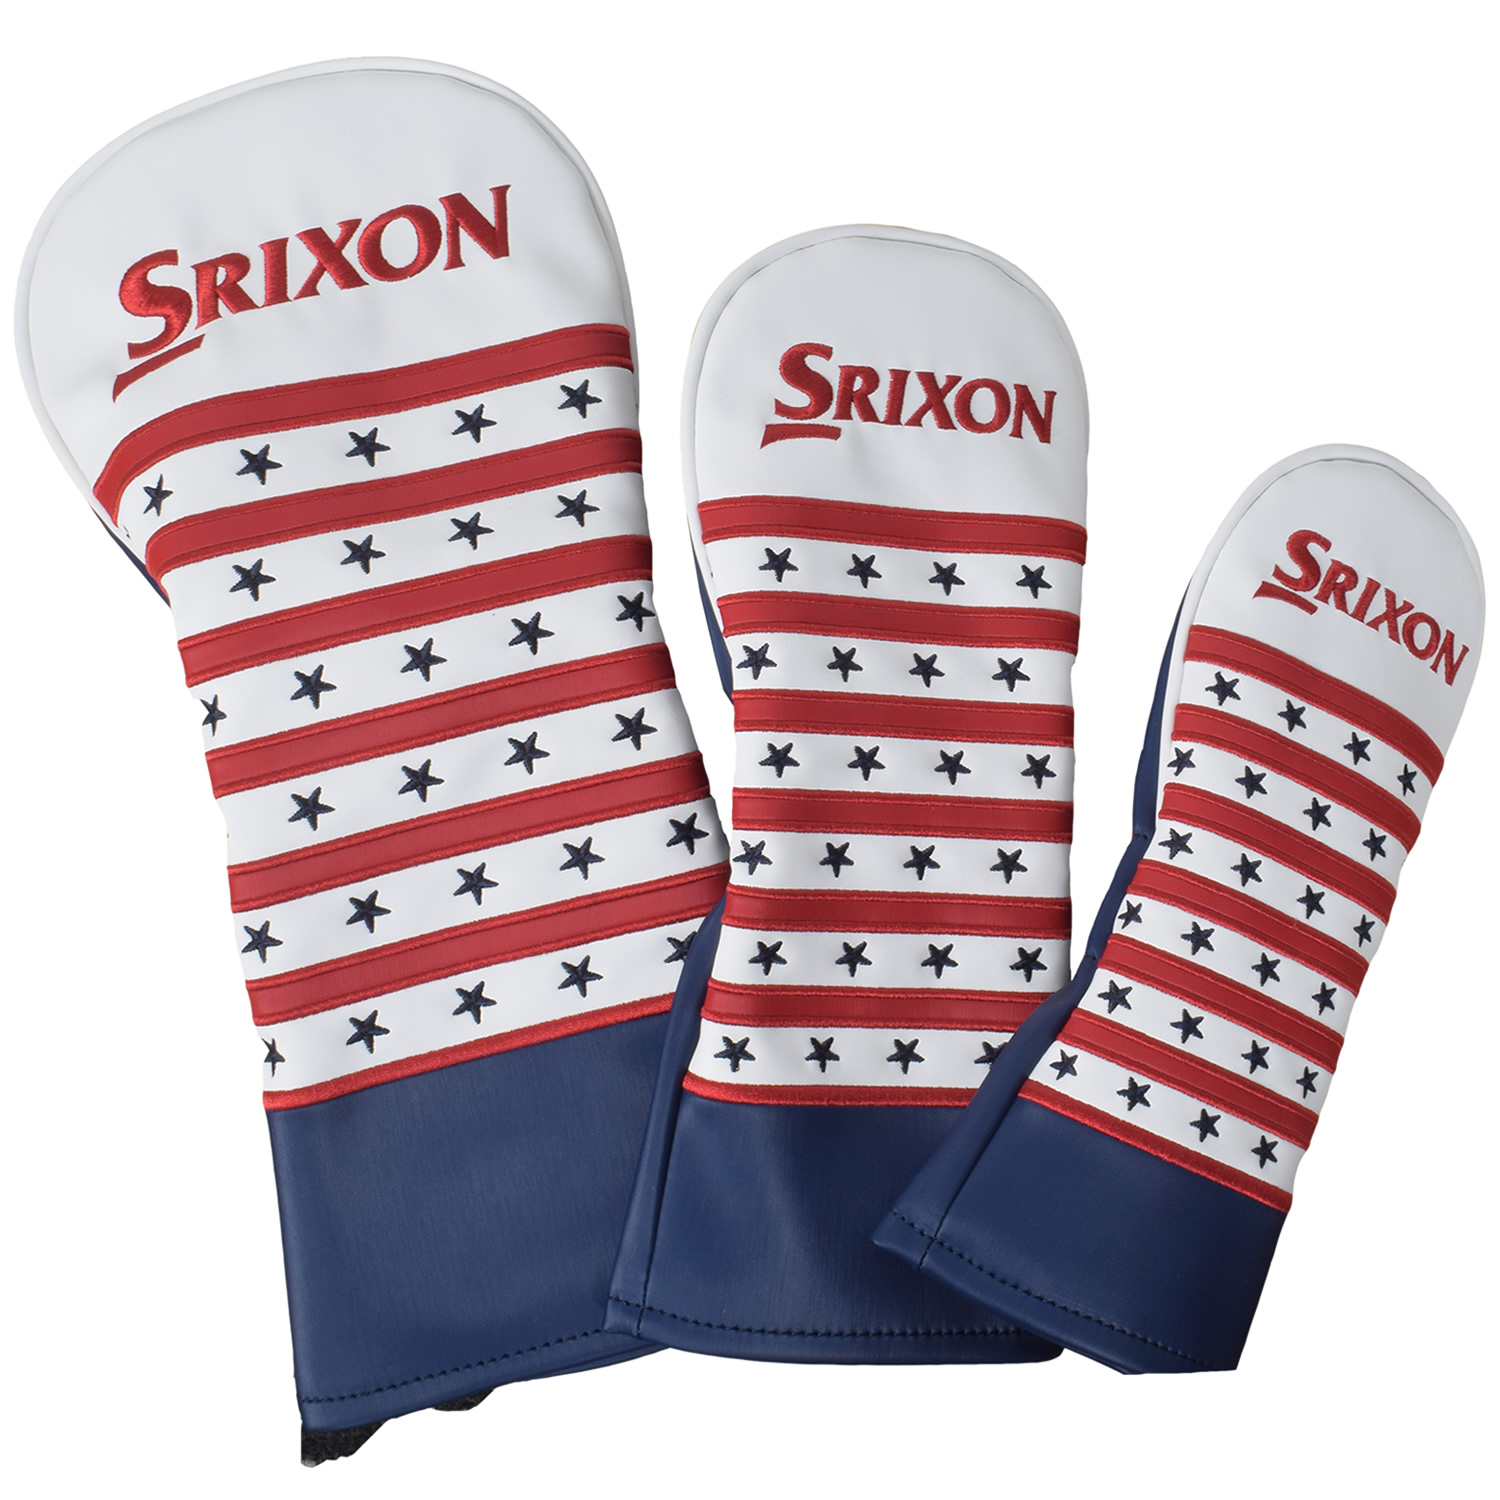 Srixon Special Edition June Major Championship Golf Headcovers Red